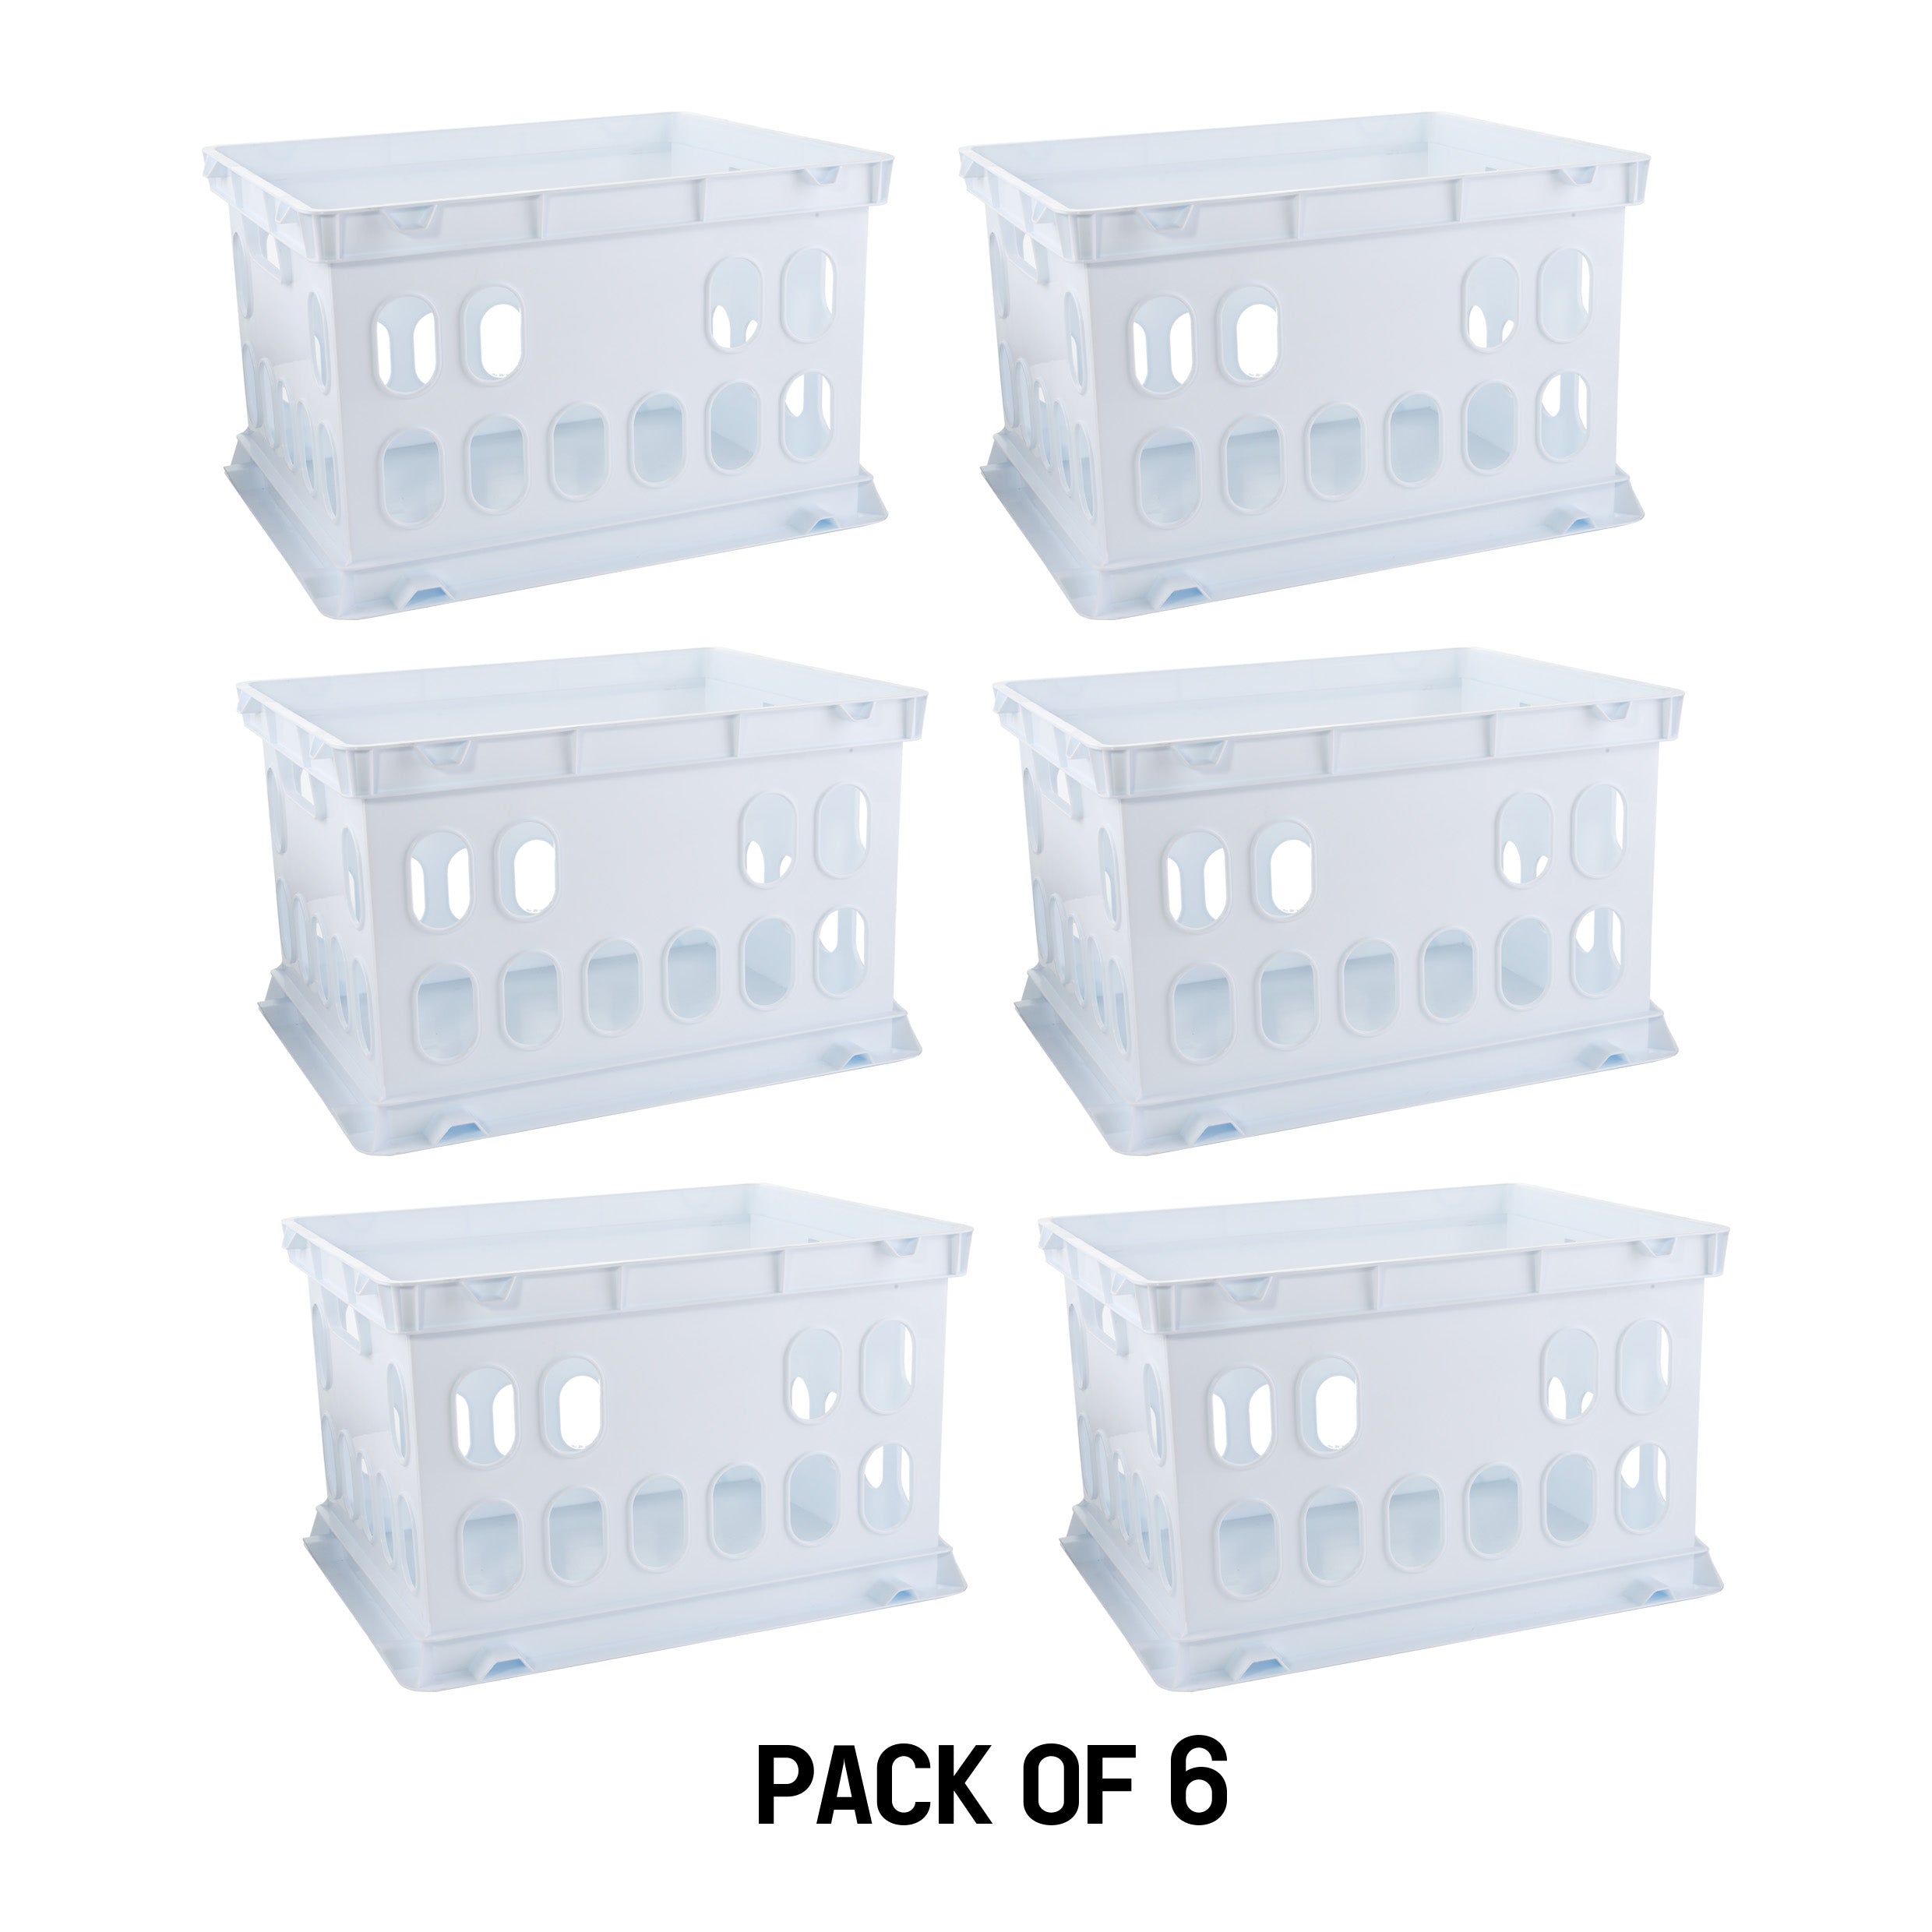 American Maid Crate Large, Pack of 6